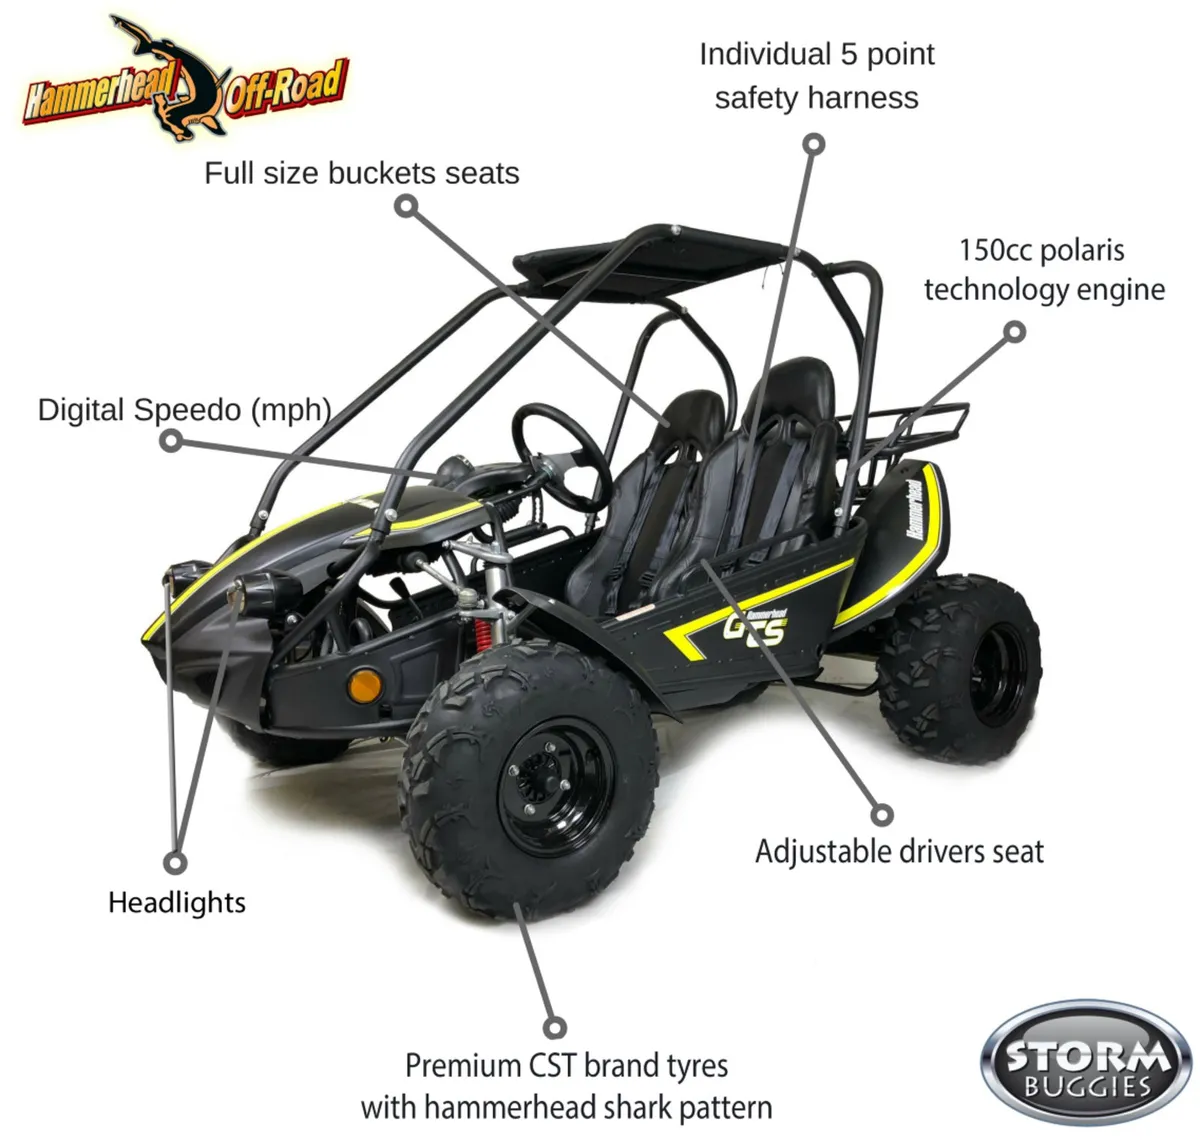 HAMMERHEAD Gts 150 buggy DELIVERY warranty choice